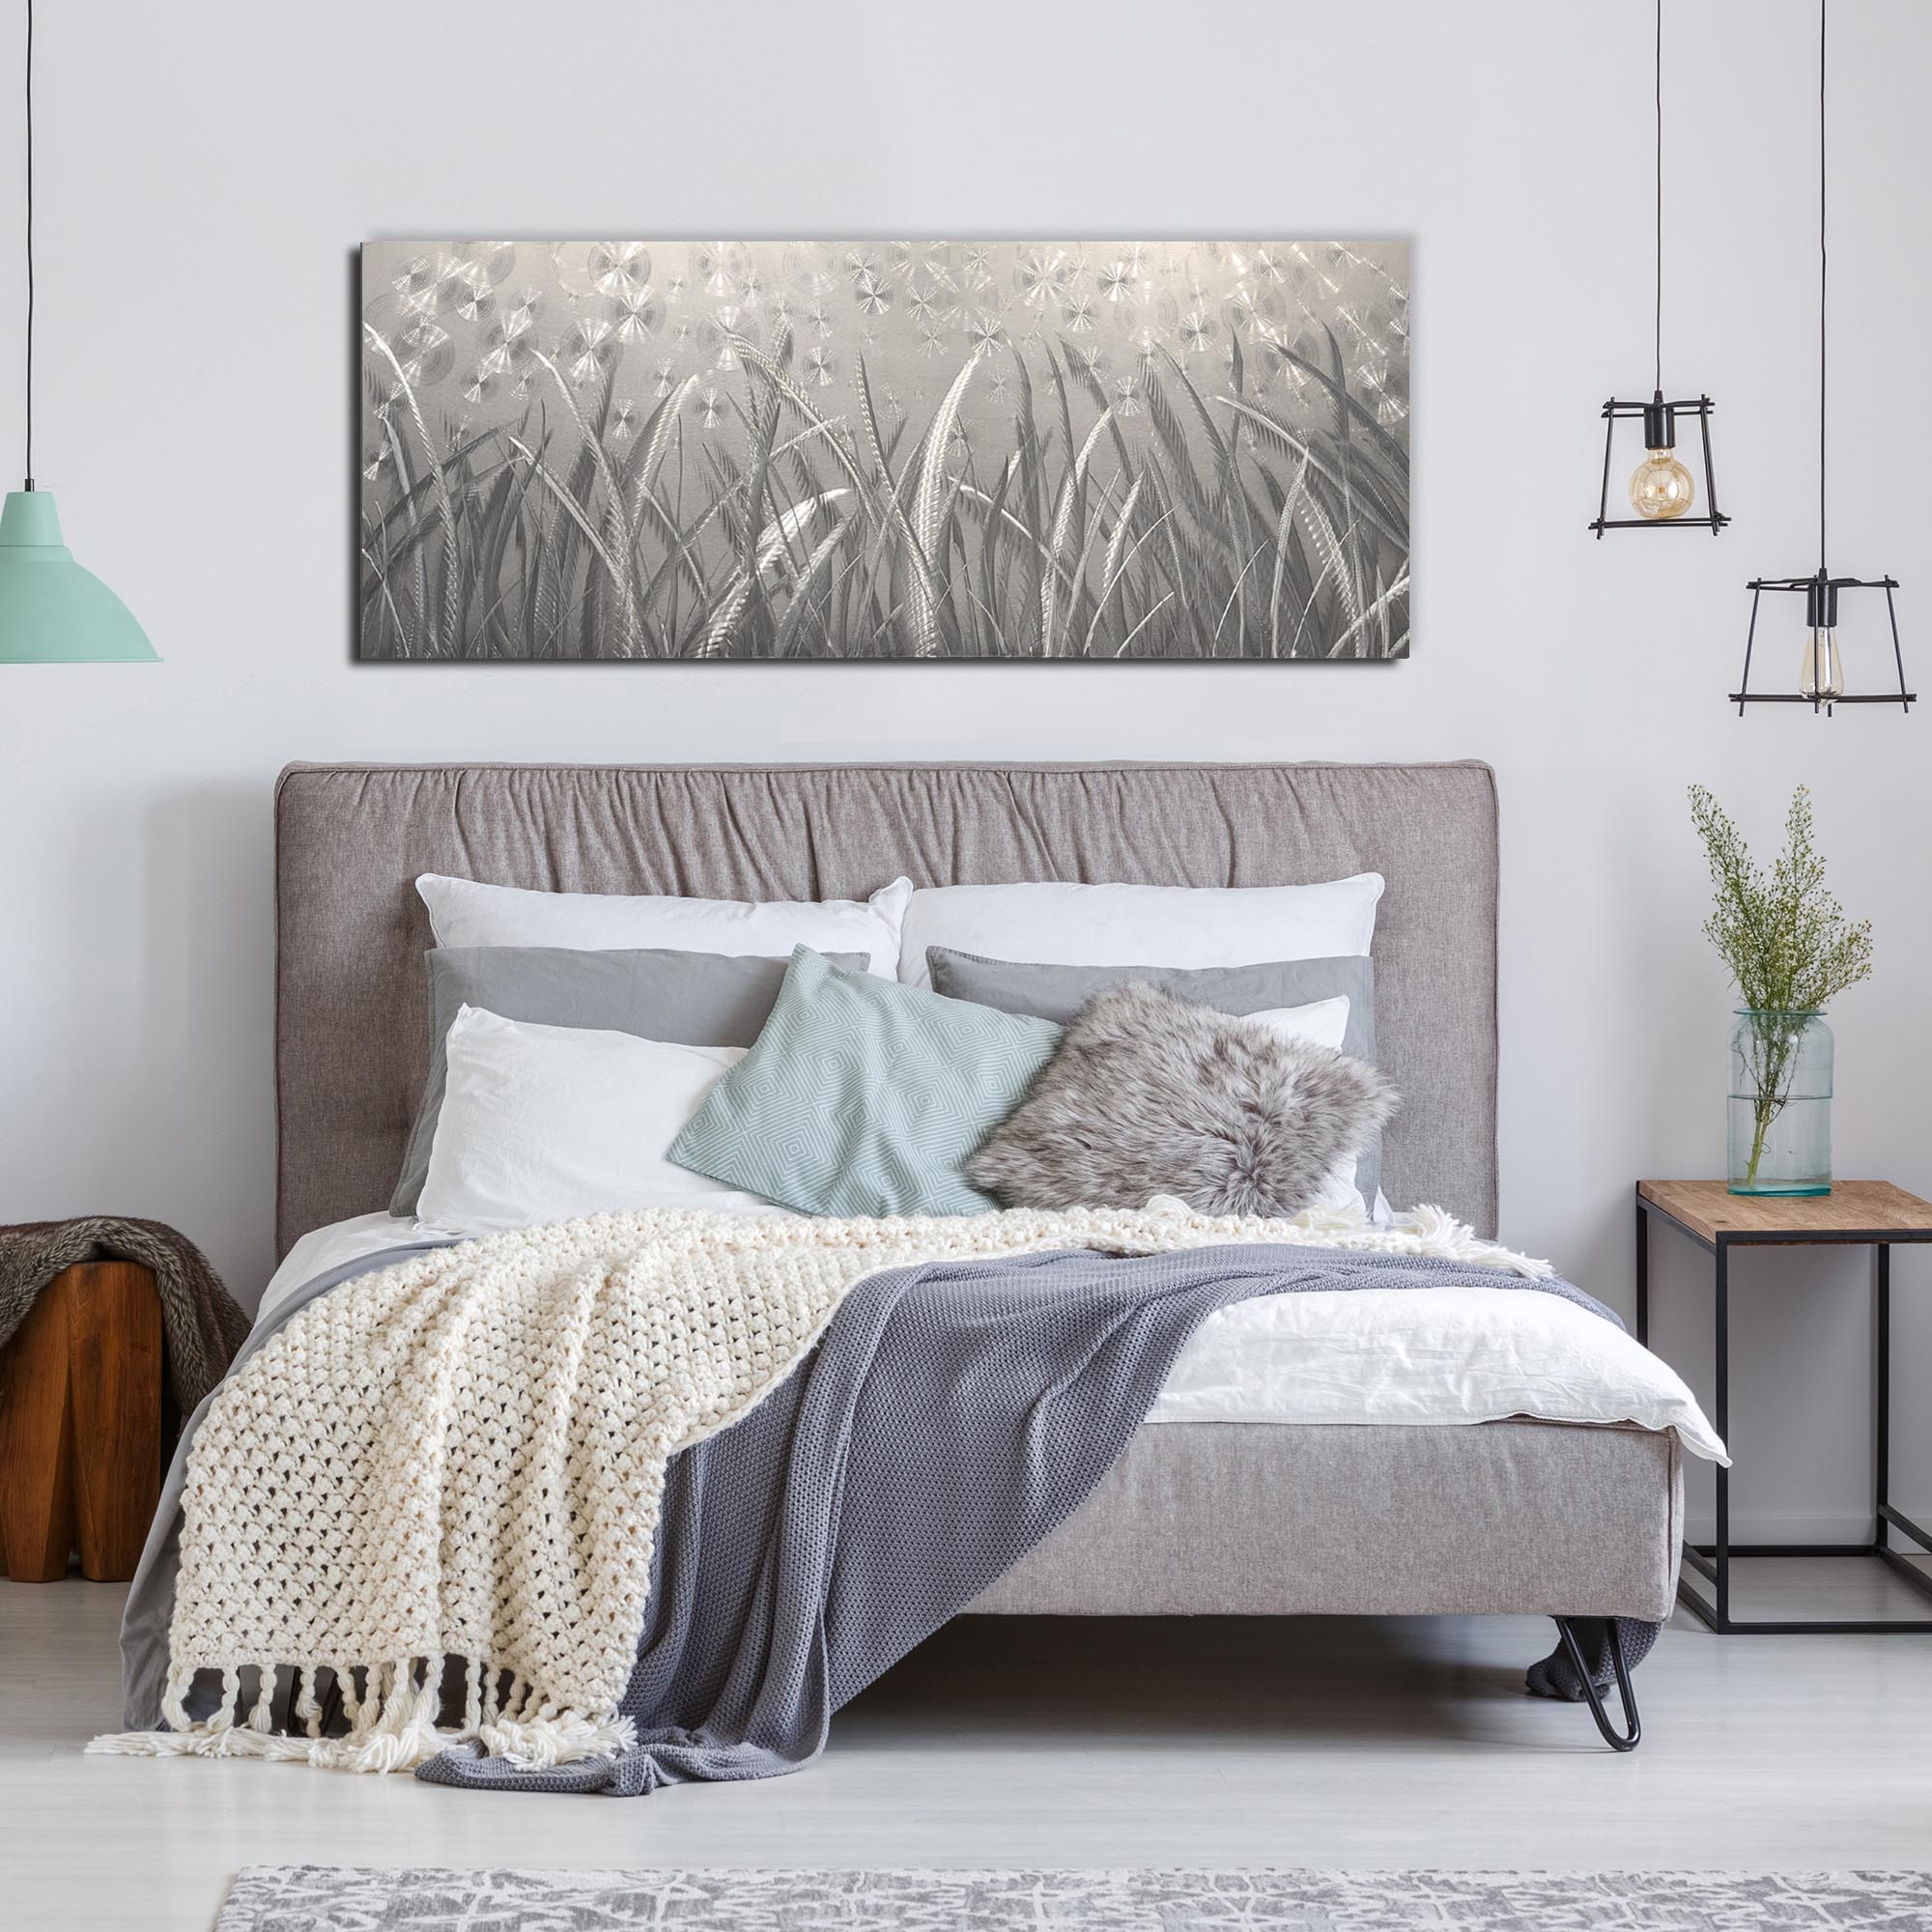 Starlight 60 by Carlos Jacobs - Metal Wall Art, Silver Metal Painting (60x24in.) - Lifestyle View